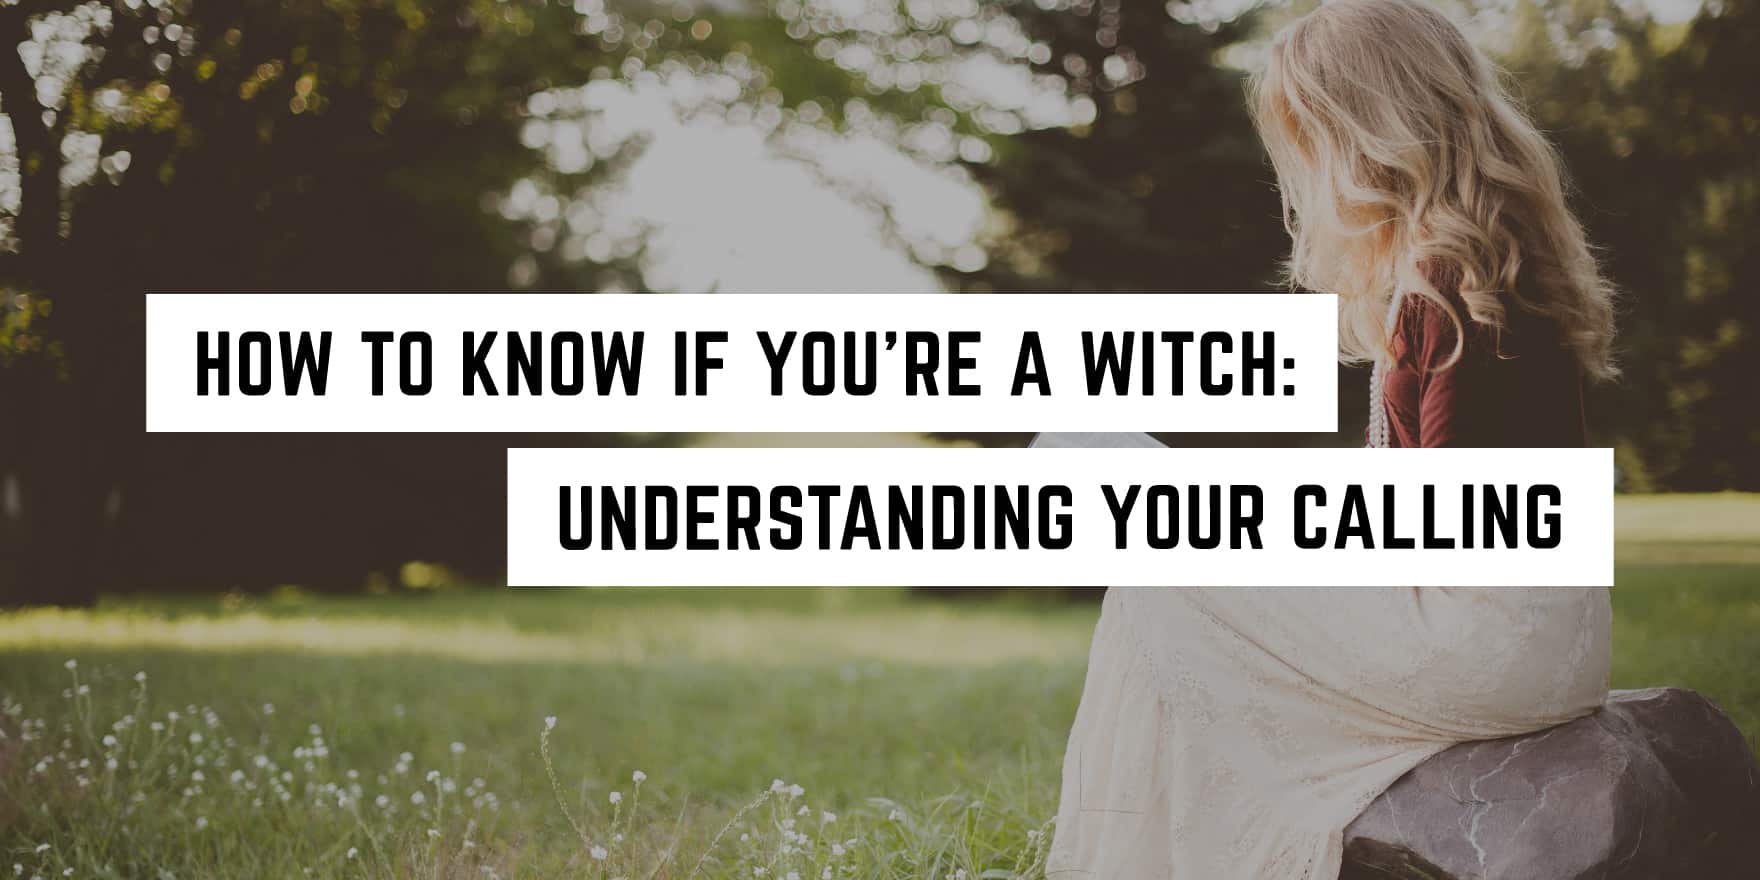 A woman sitting in a sunlit park with text overlay "how to know if you're a witch: understanding your metaphysical calling.